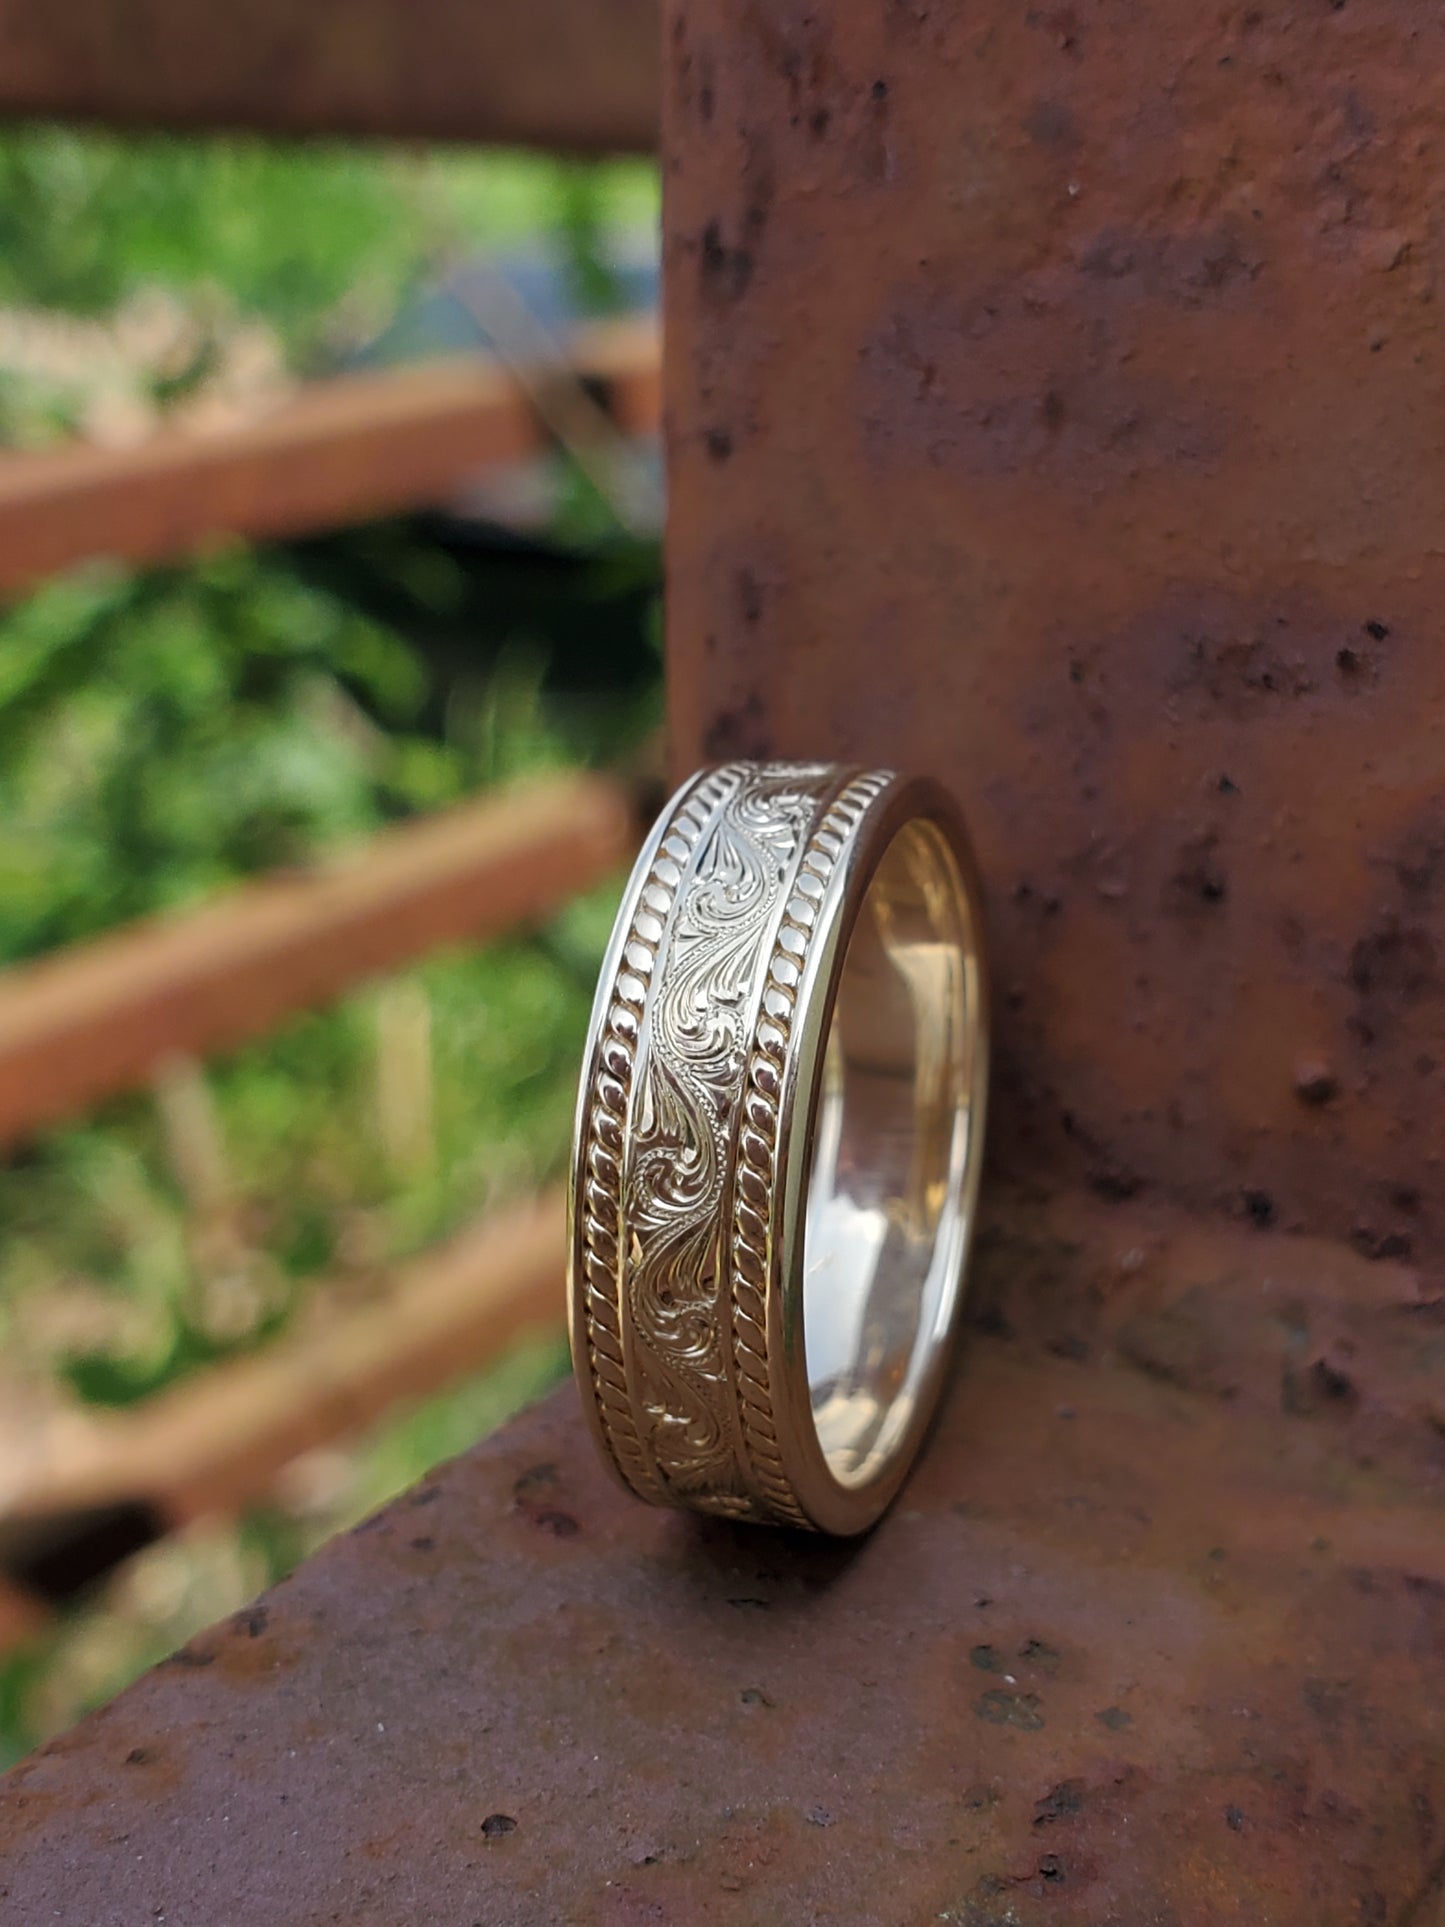 The Reata: 10K Yellow Gold Inlaid Rope Band, Hand-Engraved Western Men's Wedding Ring, Western Wedding Band, Gold Cowboy Wedding Ring